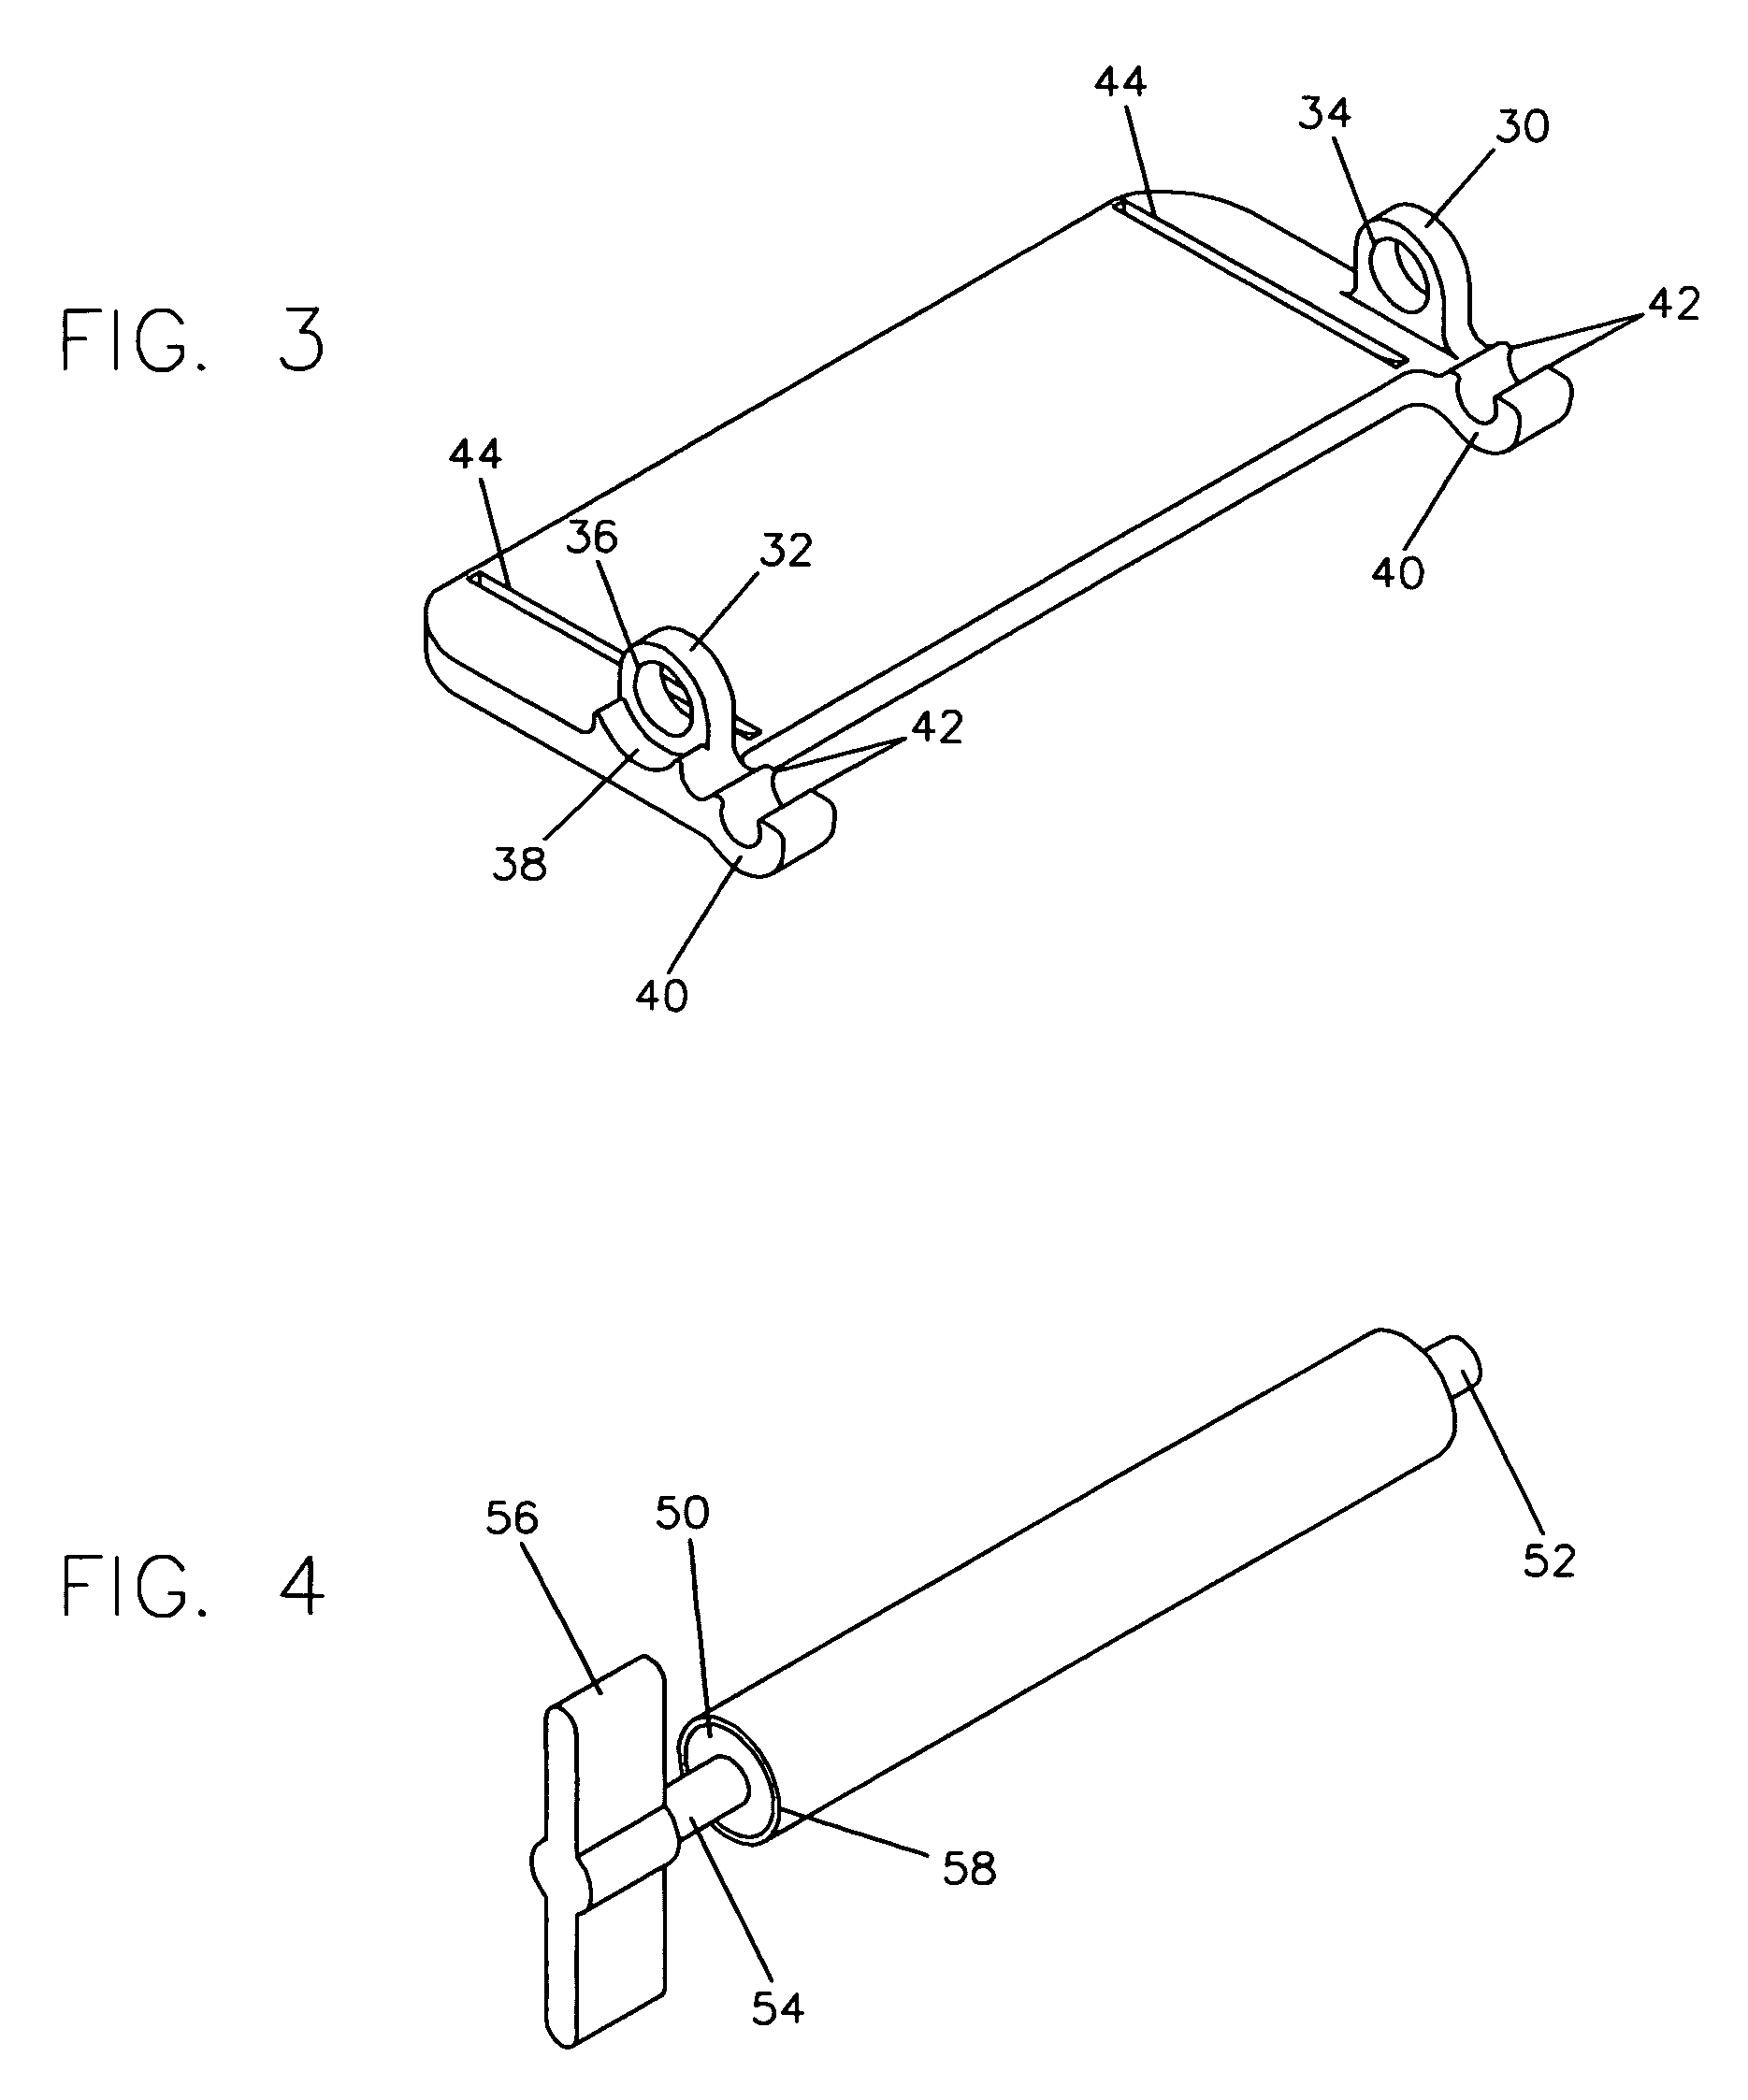 Spring-loaded tube squeezing device